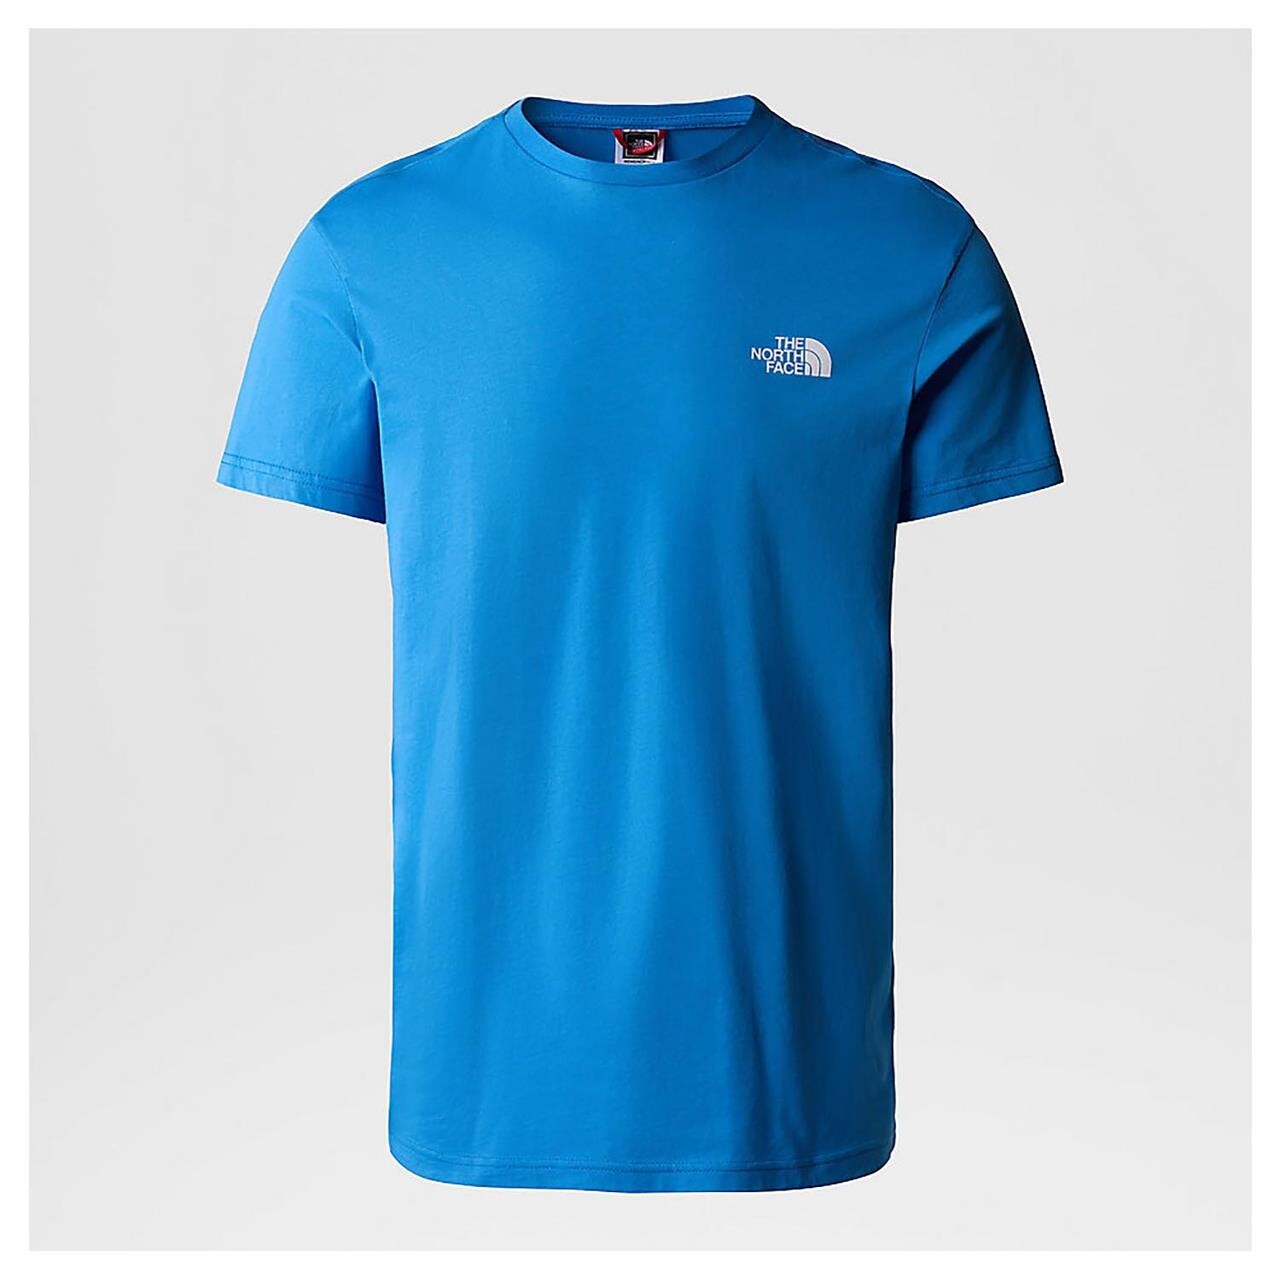 The North Face Mens S/S Simple Dome Tee (Blå (SUPER SONIC BLUE) Small) –